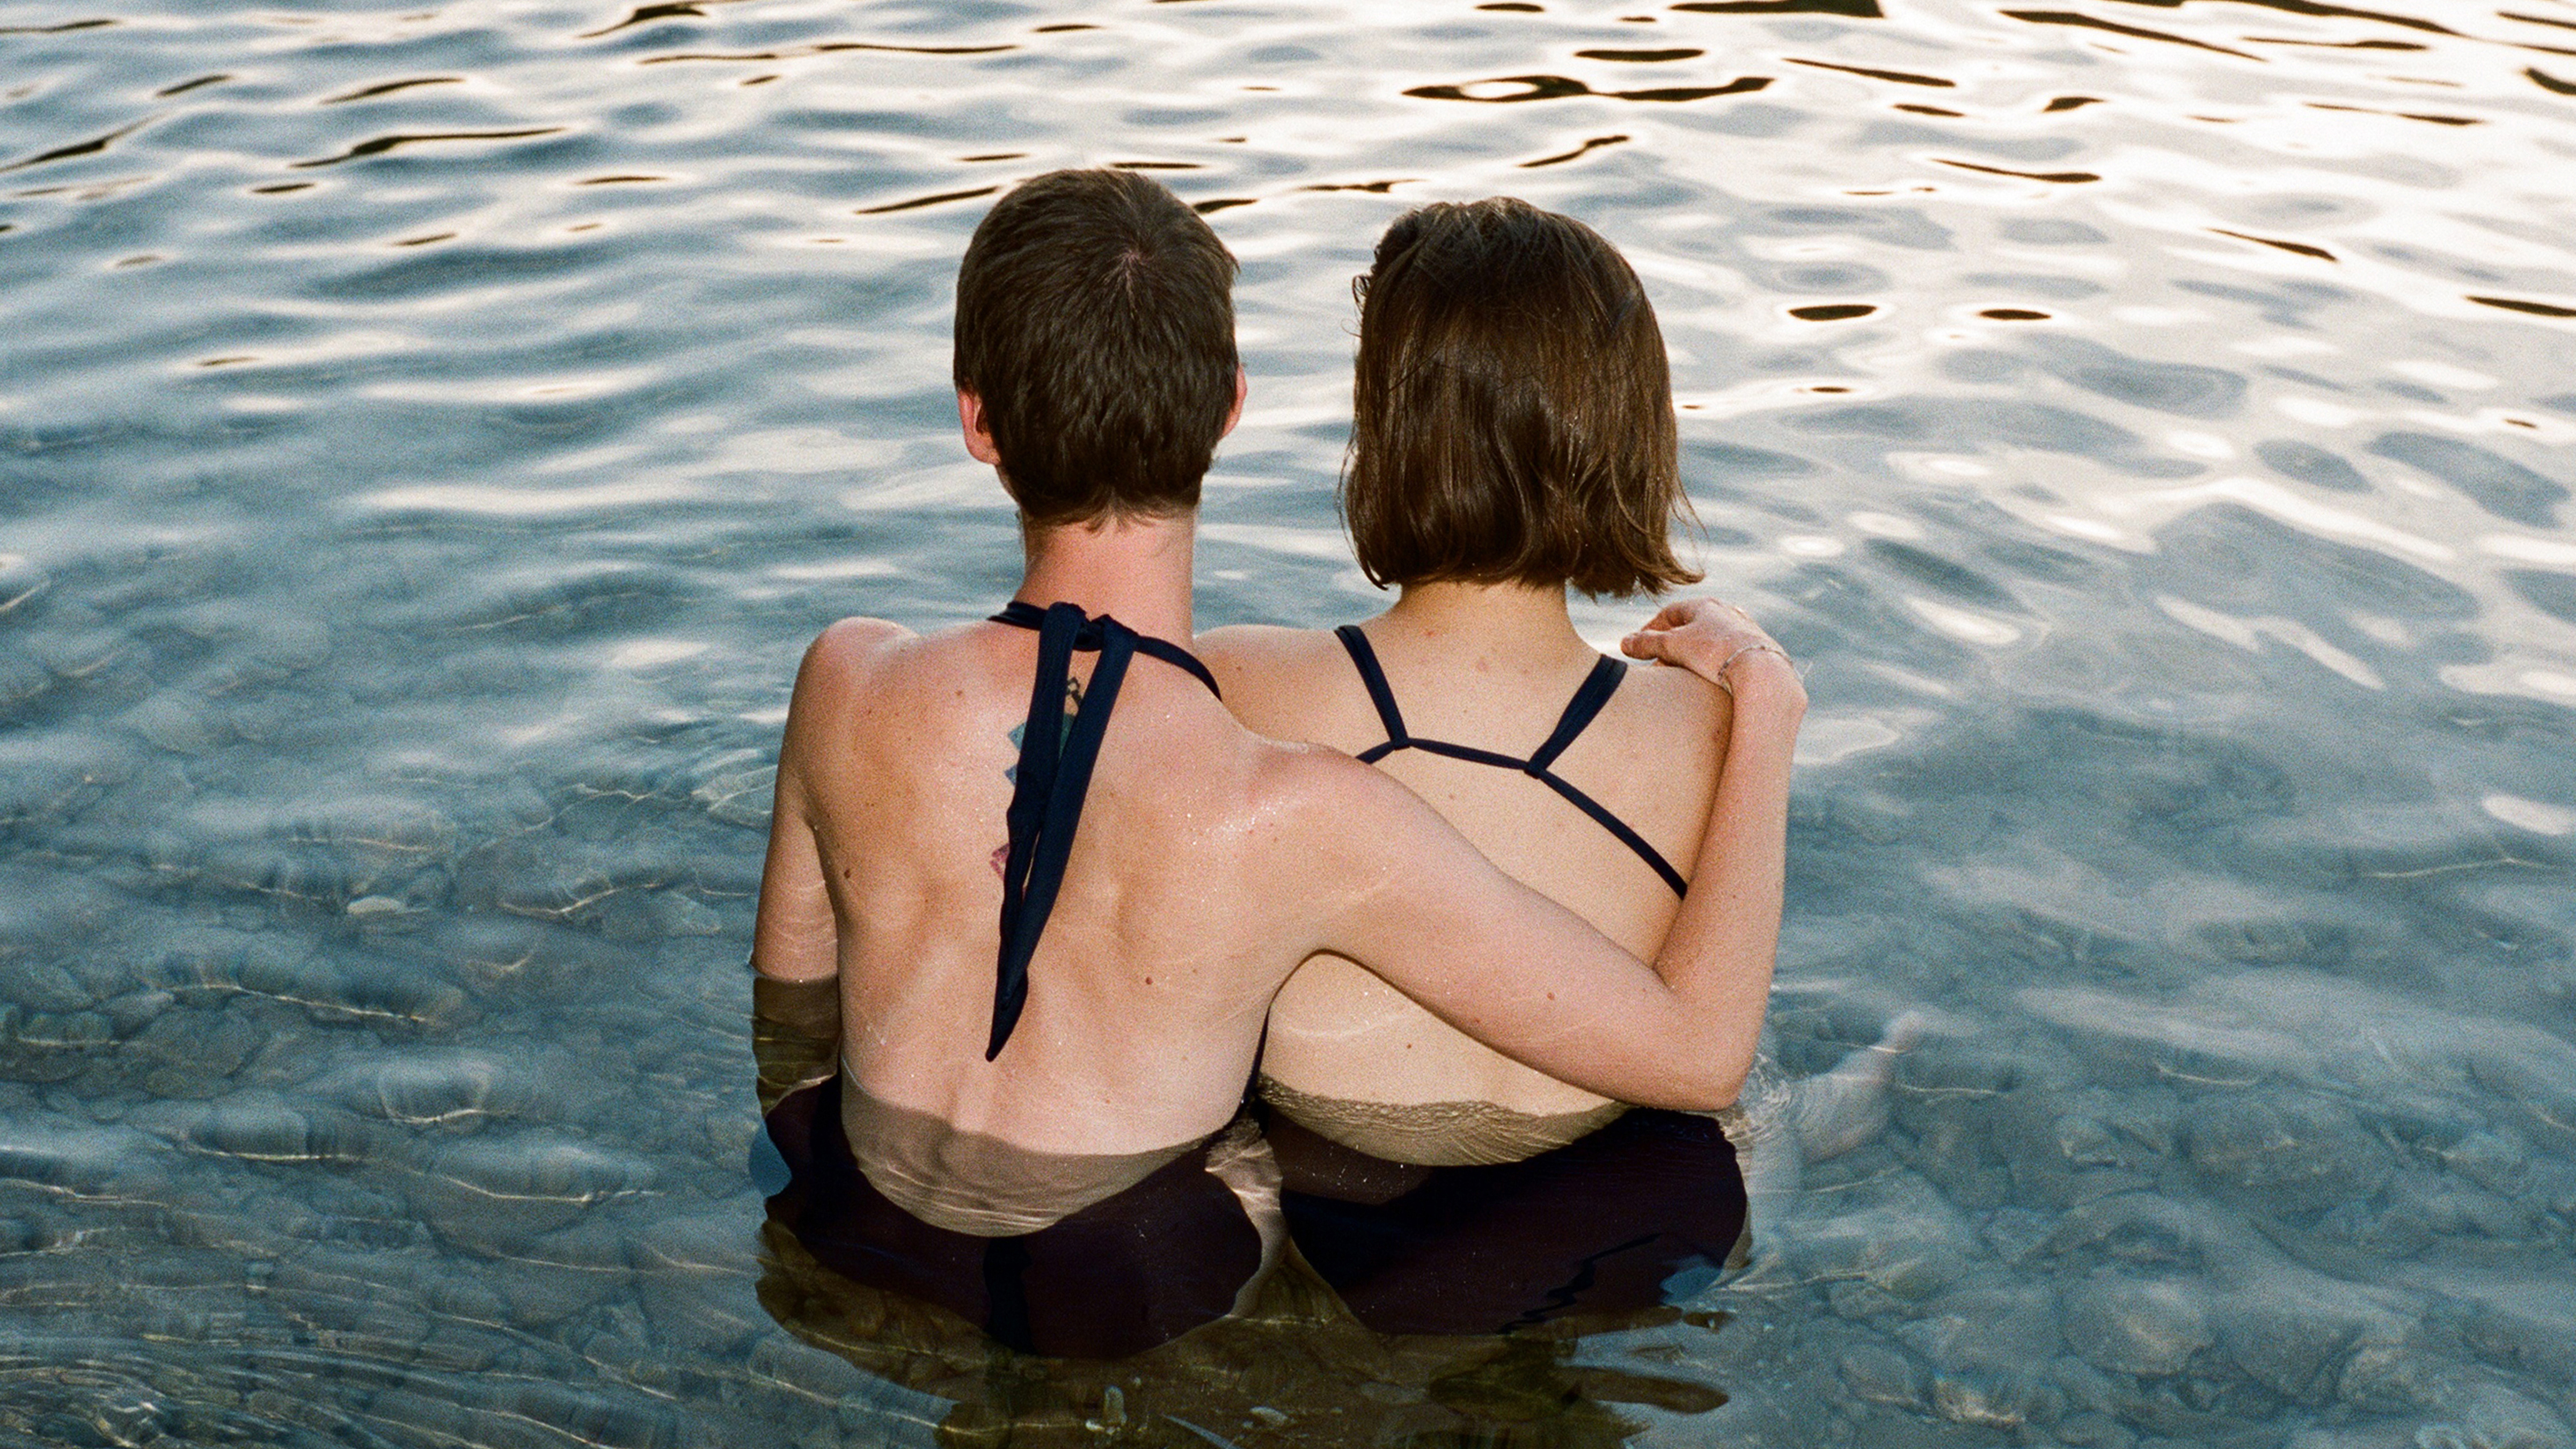 two people in bathing suits in lake, facing away from the camera, with an arm around each other